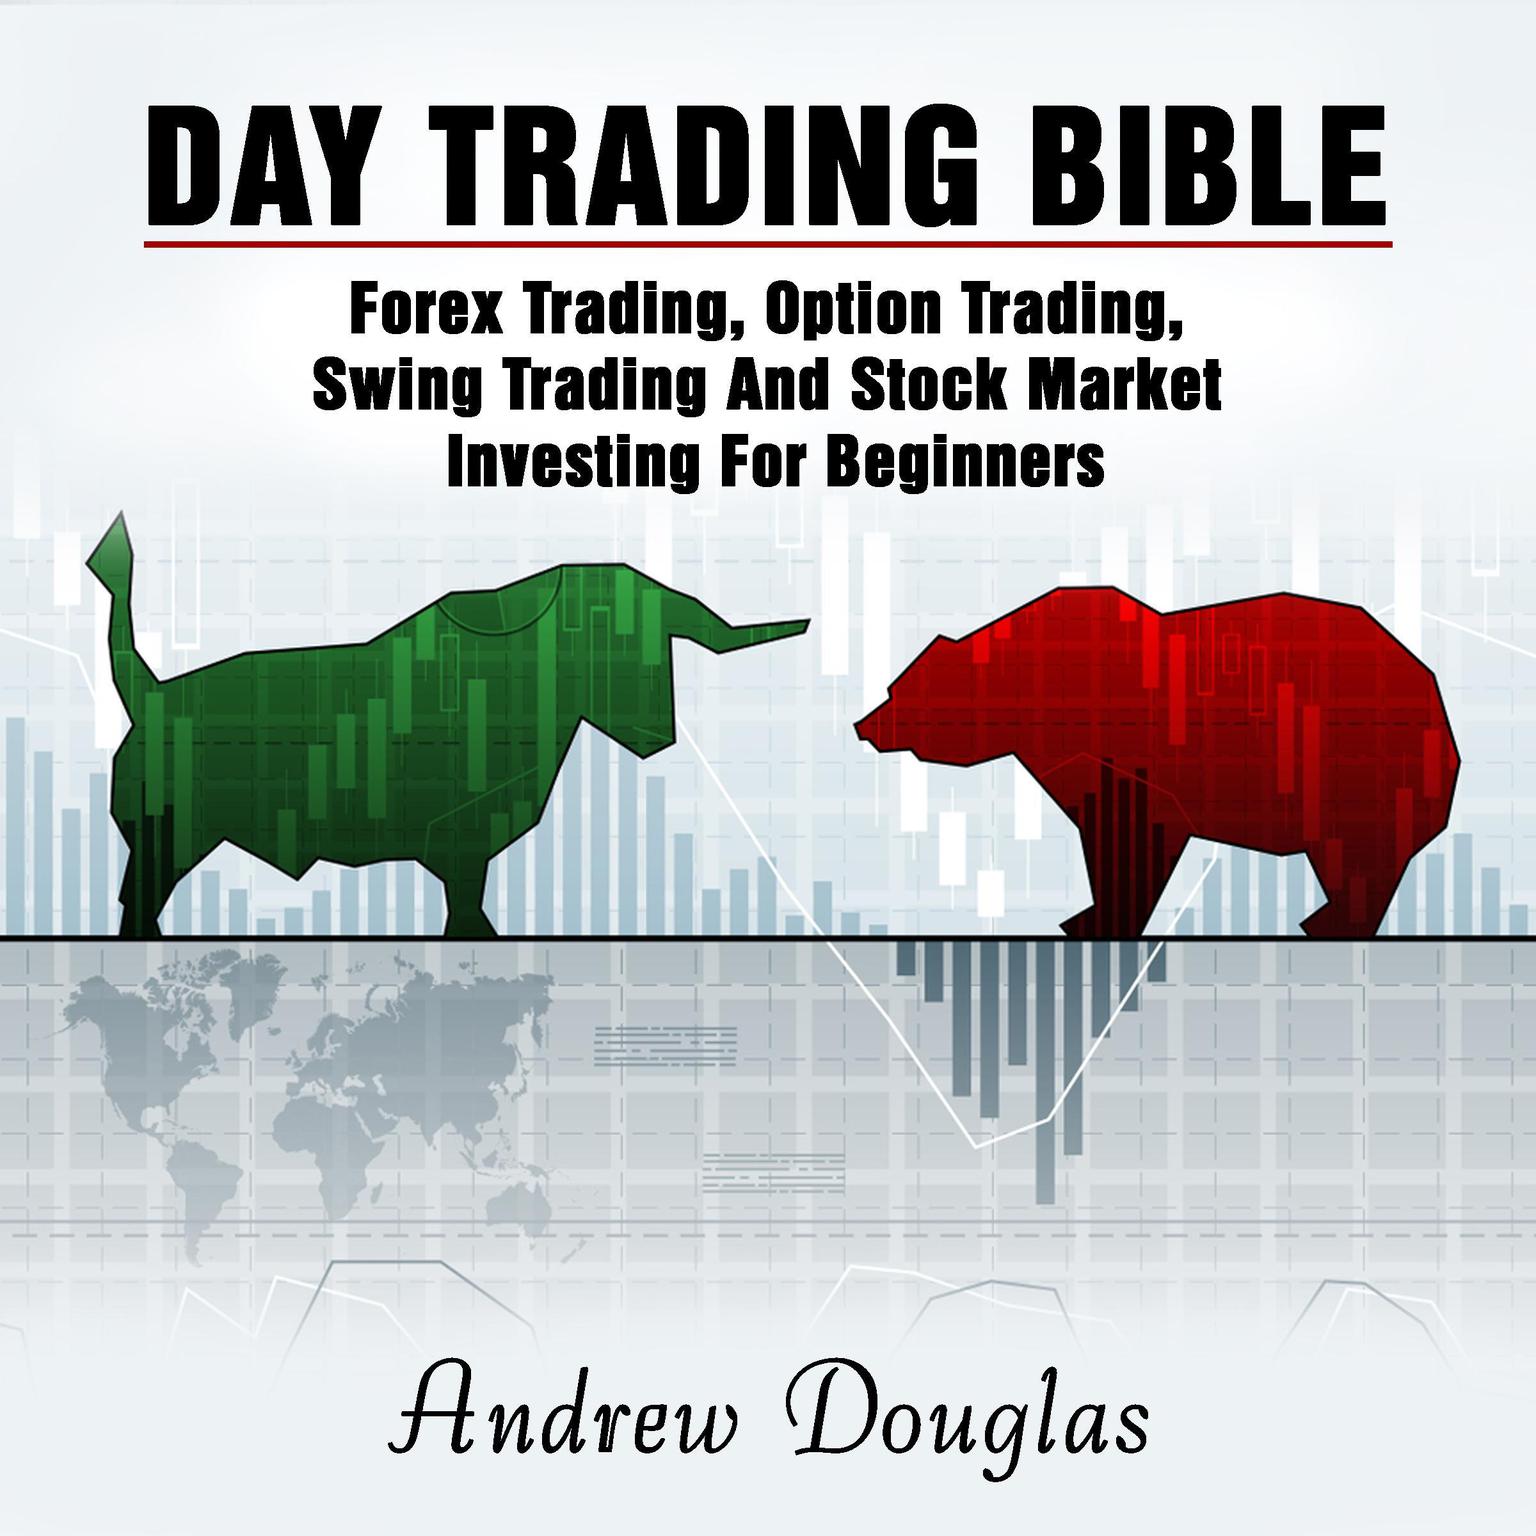 Day Trading Bible: Forex Trading, Option Trading, Swing Trading And Stock Market Investing For Beginners Audiobook, by Andrew Douglas